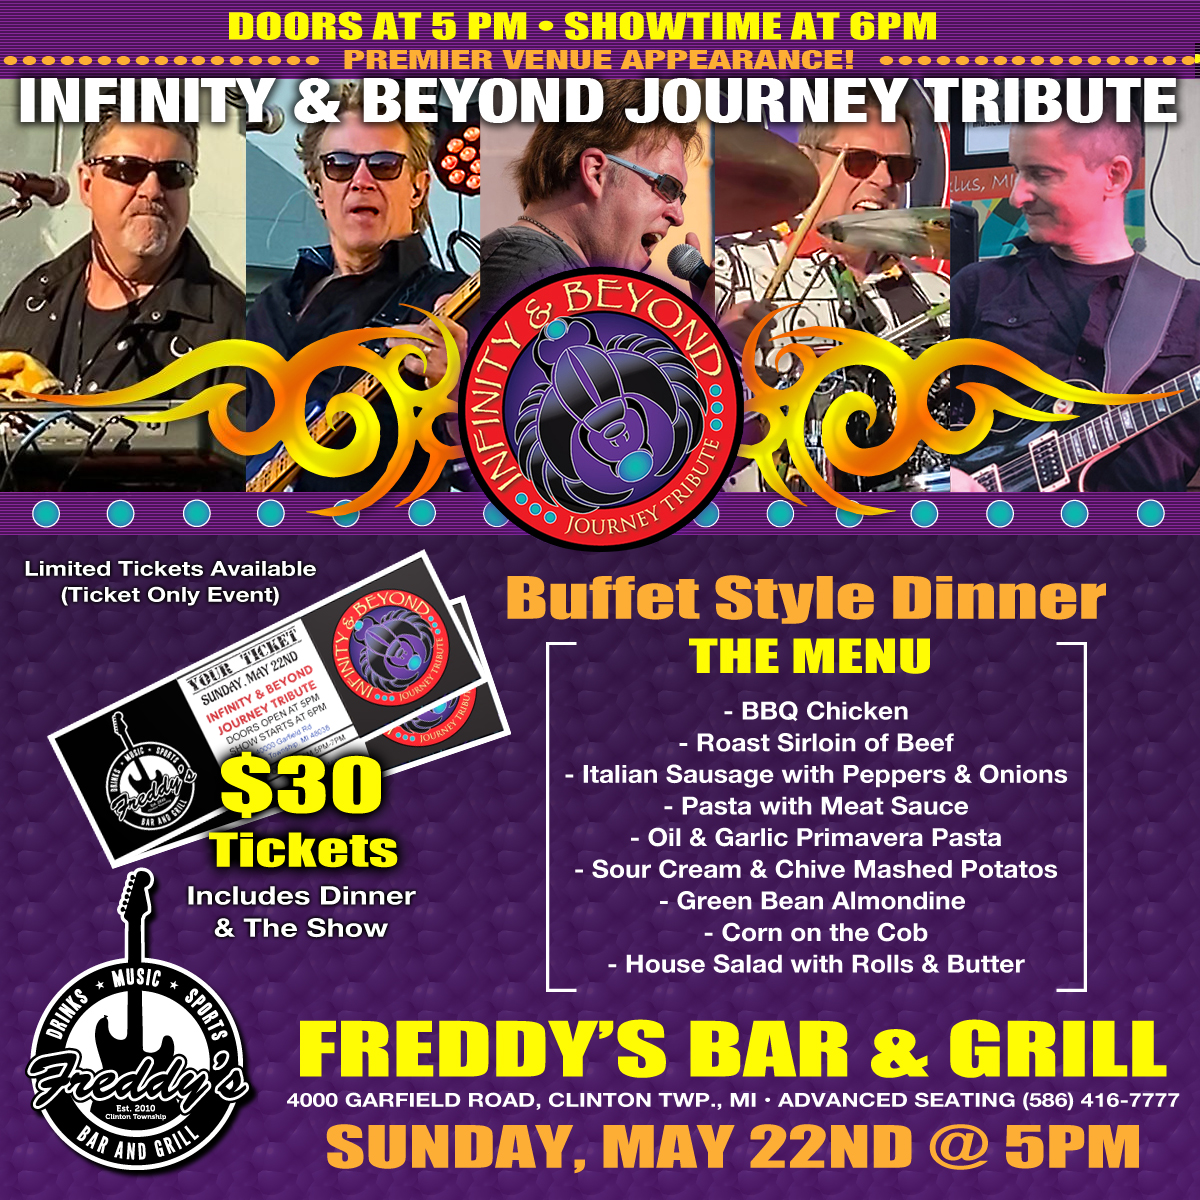 Tribute Sundays: Infinity and Beyond (Journey Tribute)